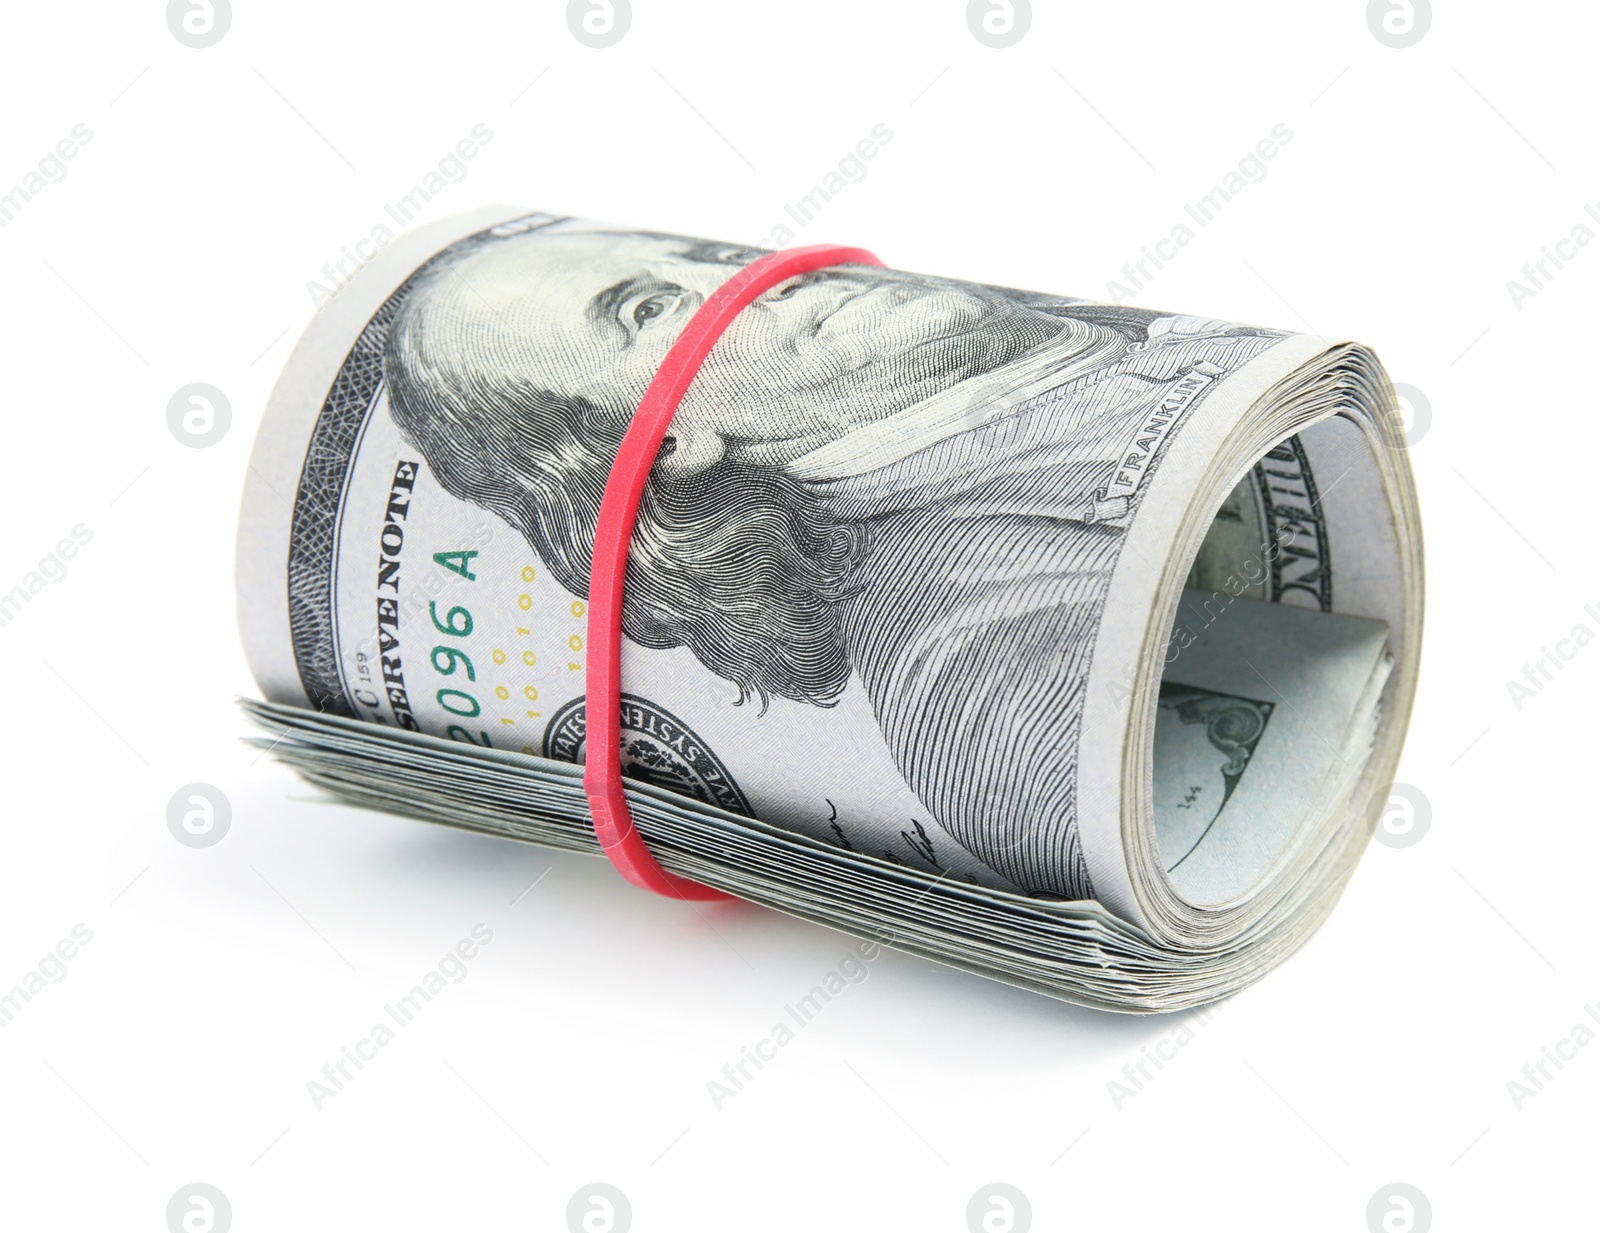 Photo of Roll of dollar bills with rubber band on white background